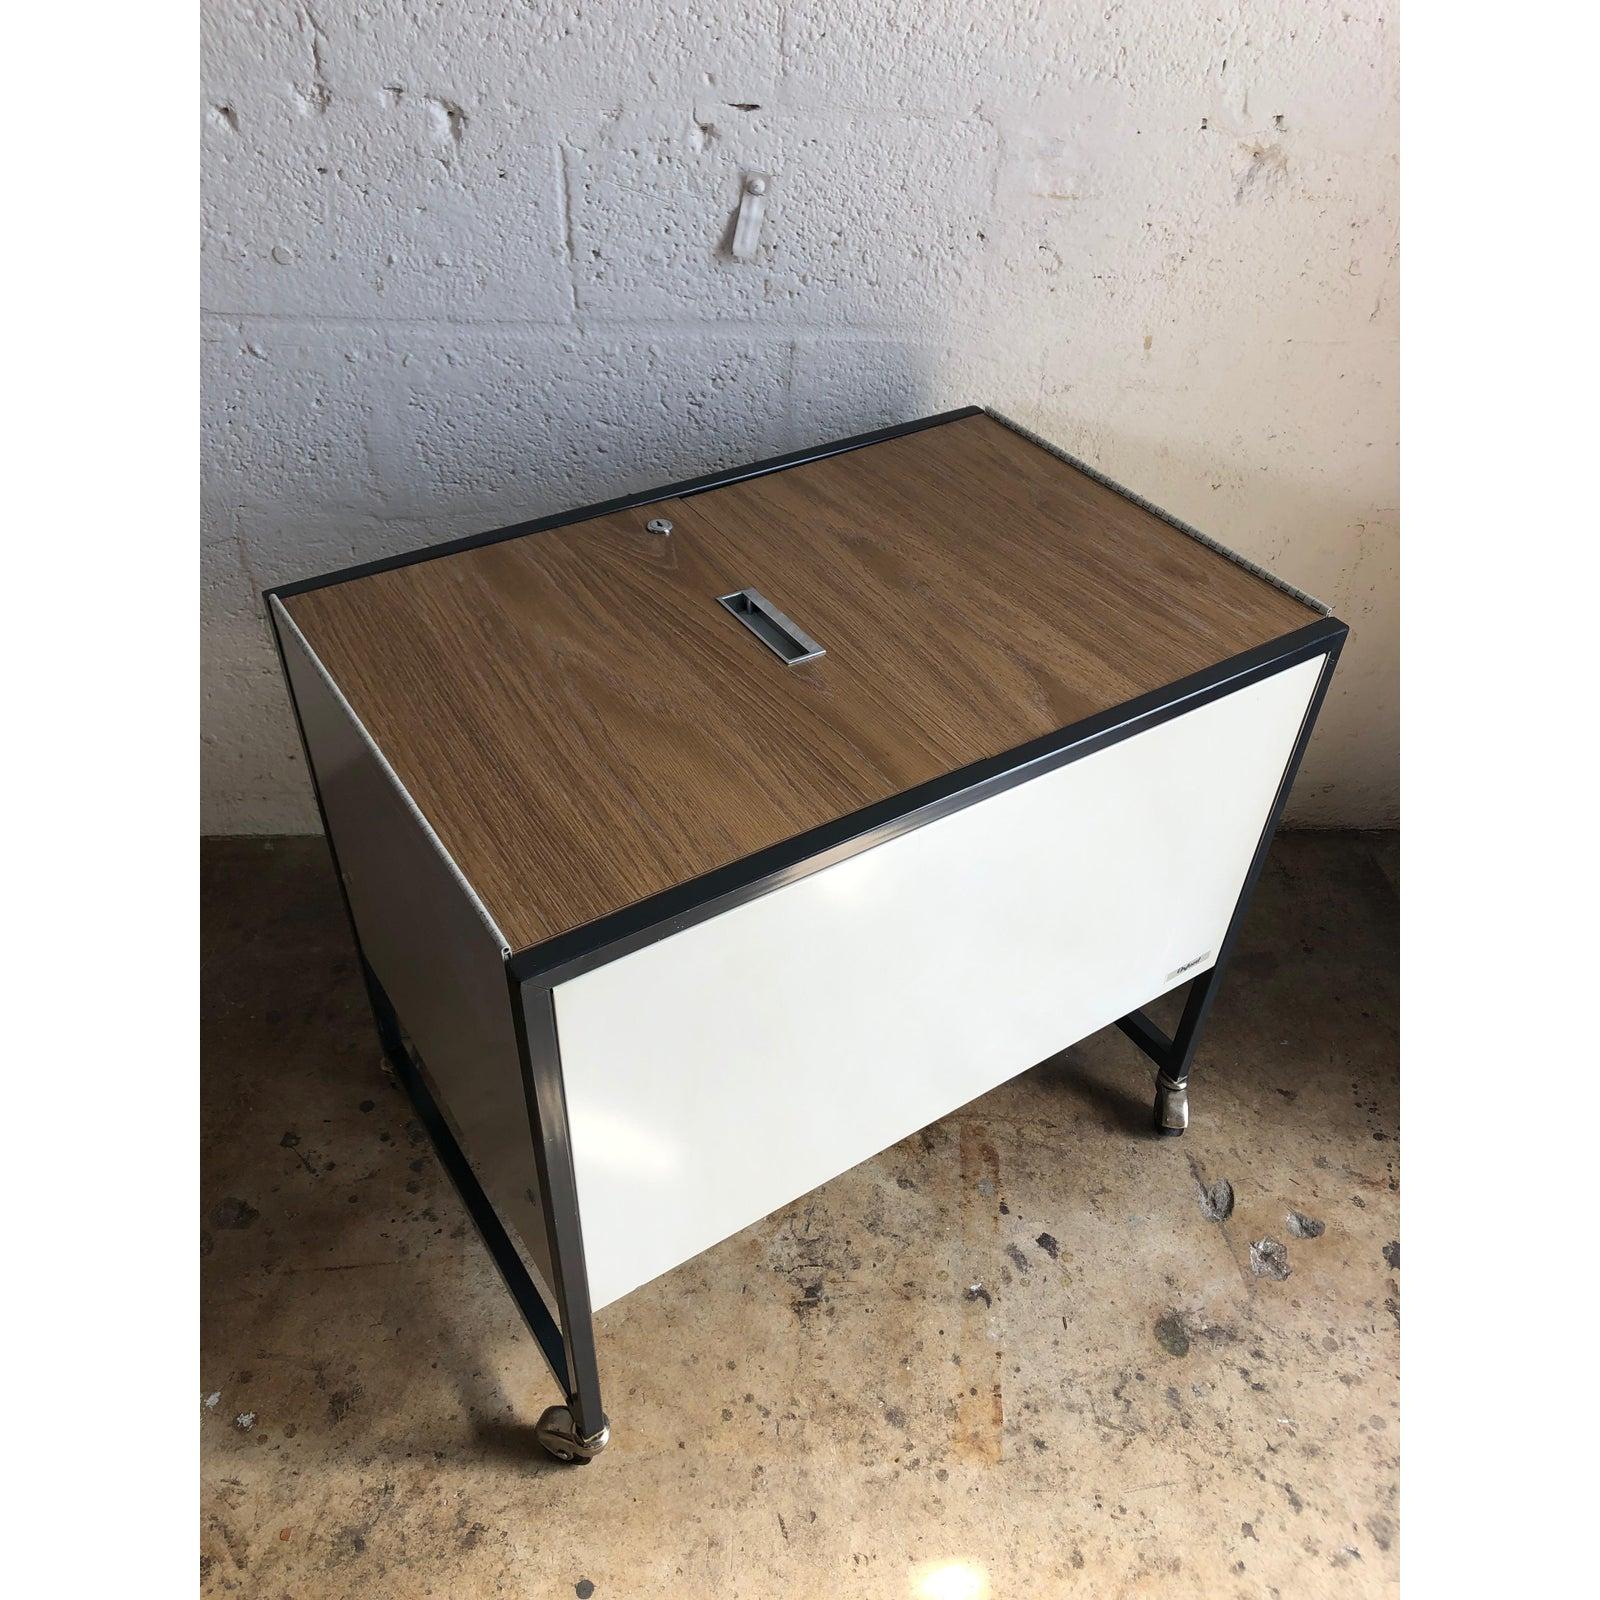 Mid-Century Modern Vintage Midcentury Industrial Filing Cabinet/ Cart by Oxford from the 1970s